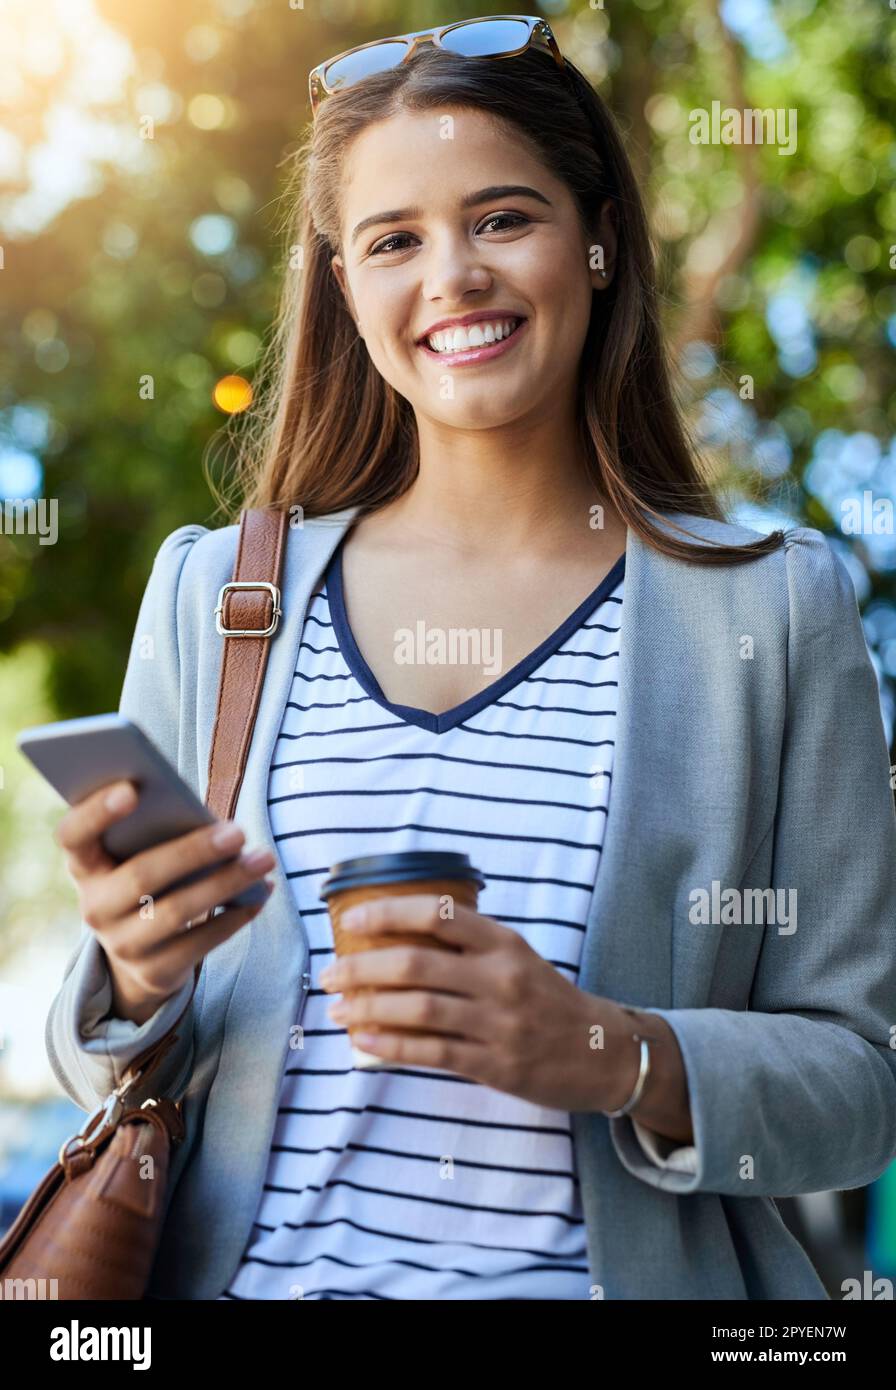 Im always in contact with the office. Cropped portrait of an attractive young woman using her cellphone while commuting to work. Stock Photo